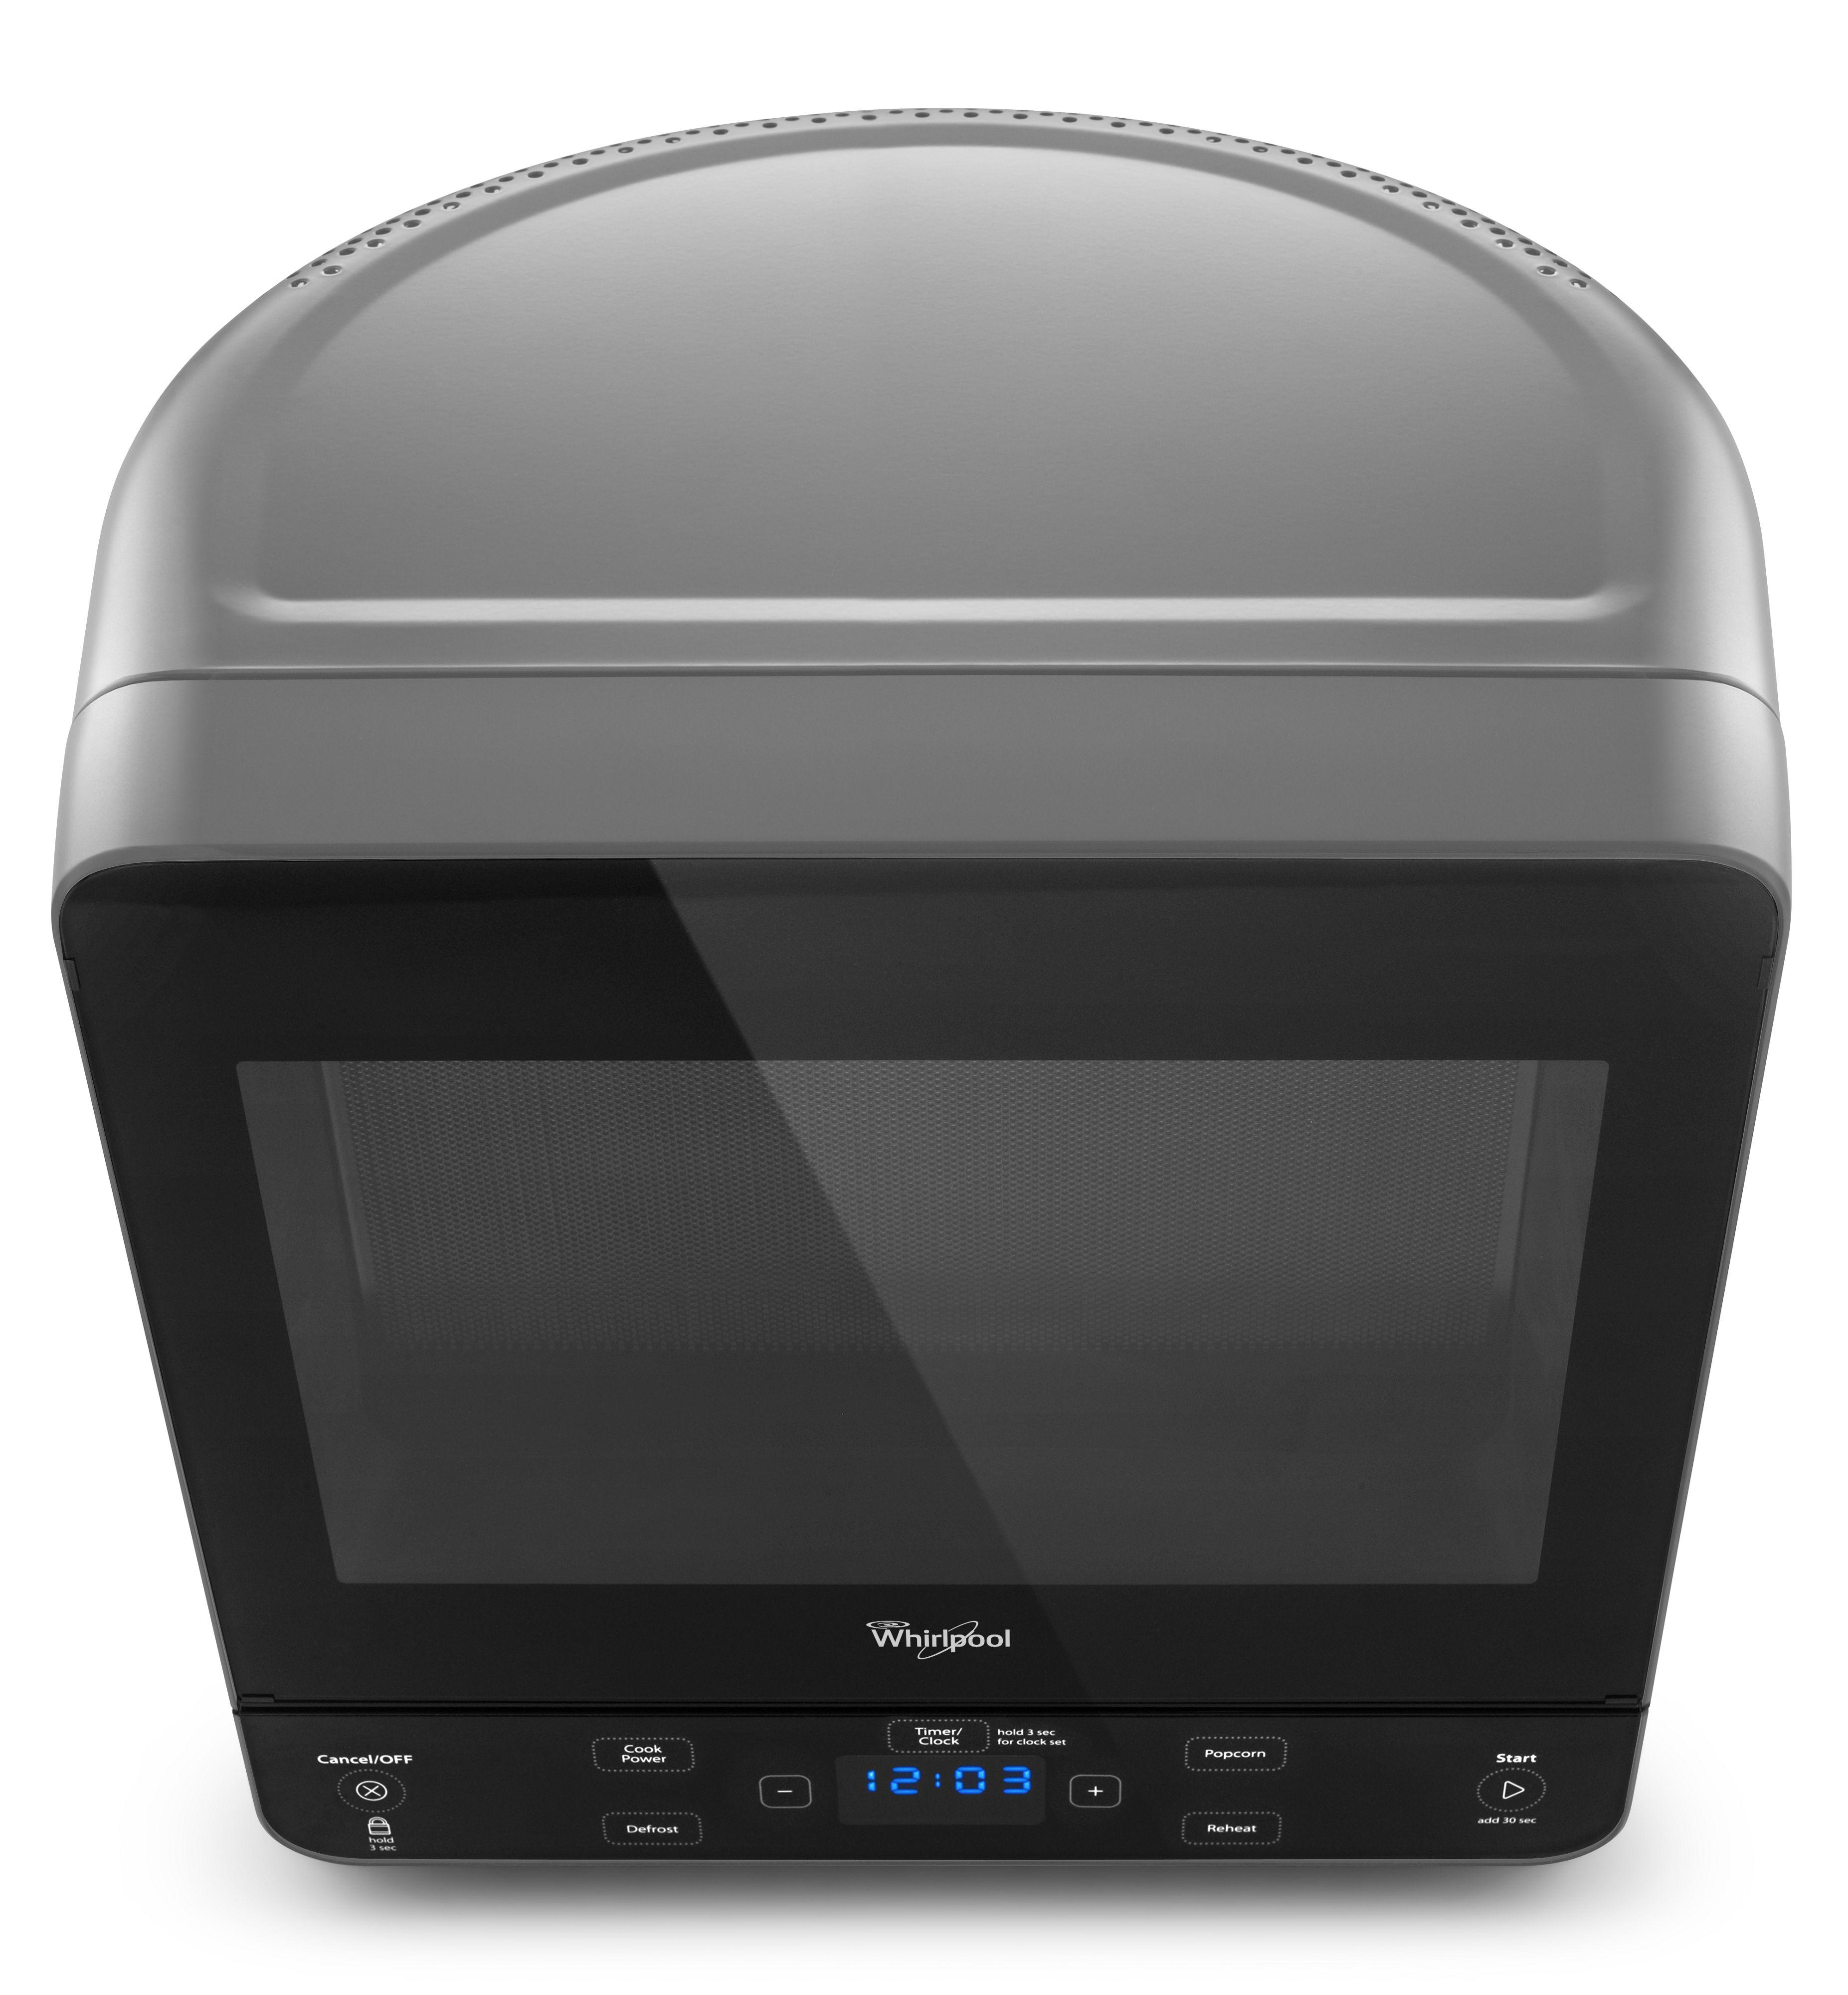 Whirlpool WMC20005YD 15 Inch Countertop Microwave with 0.5 cu. ft